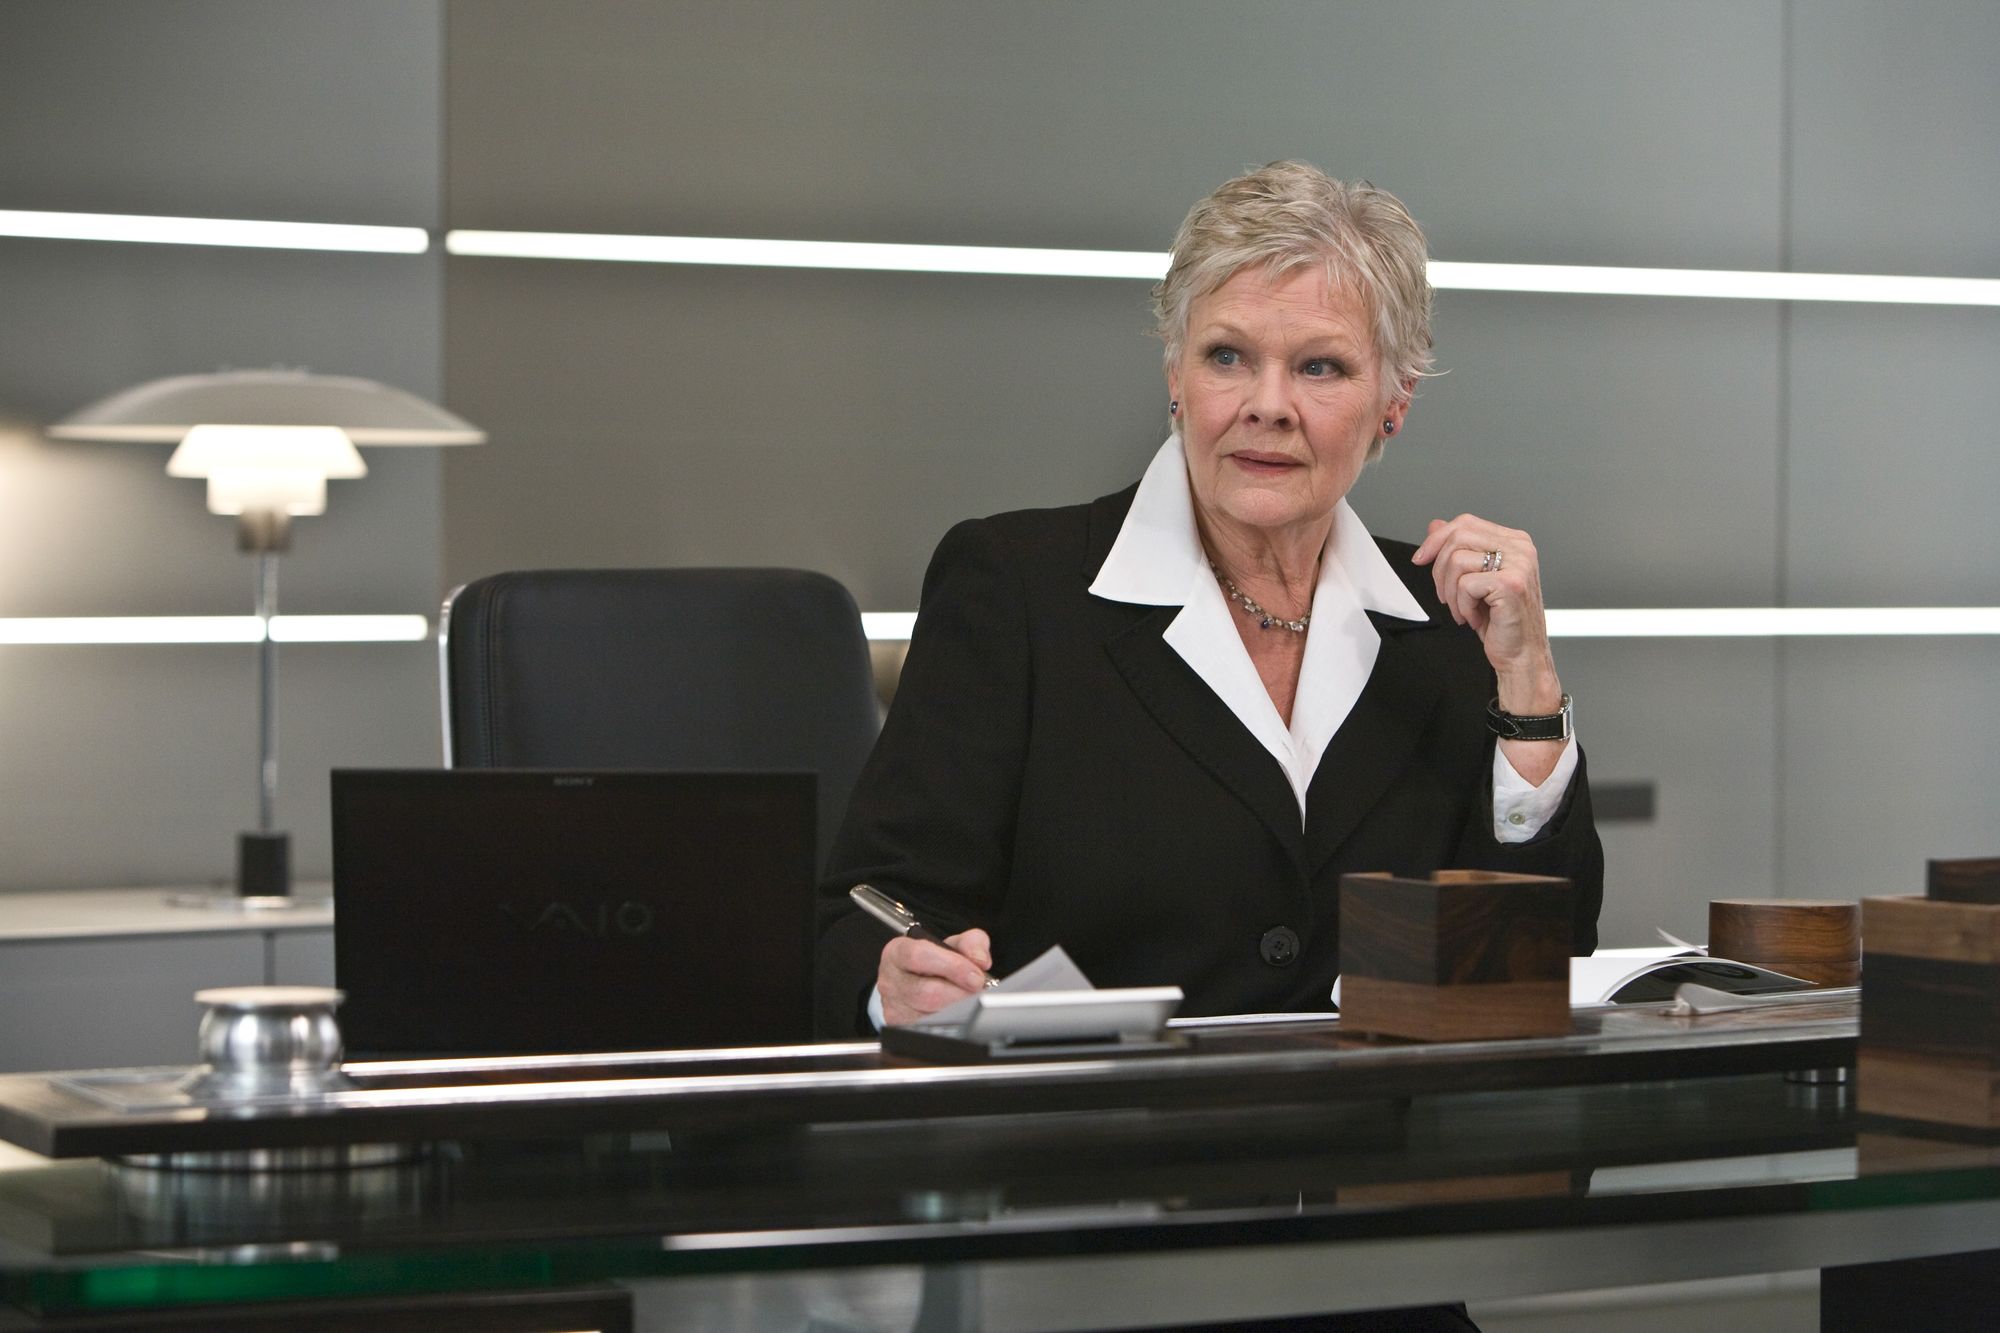 Judi Dench as M in Quantum of Solace sitting in an Interstuhl Silver Chair lights and lamps and desk in film